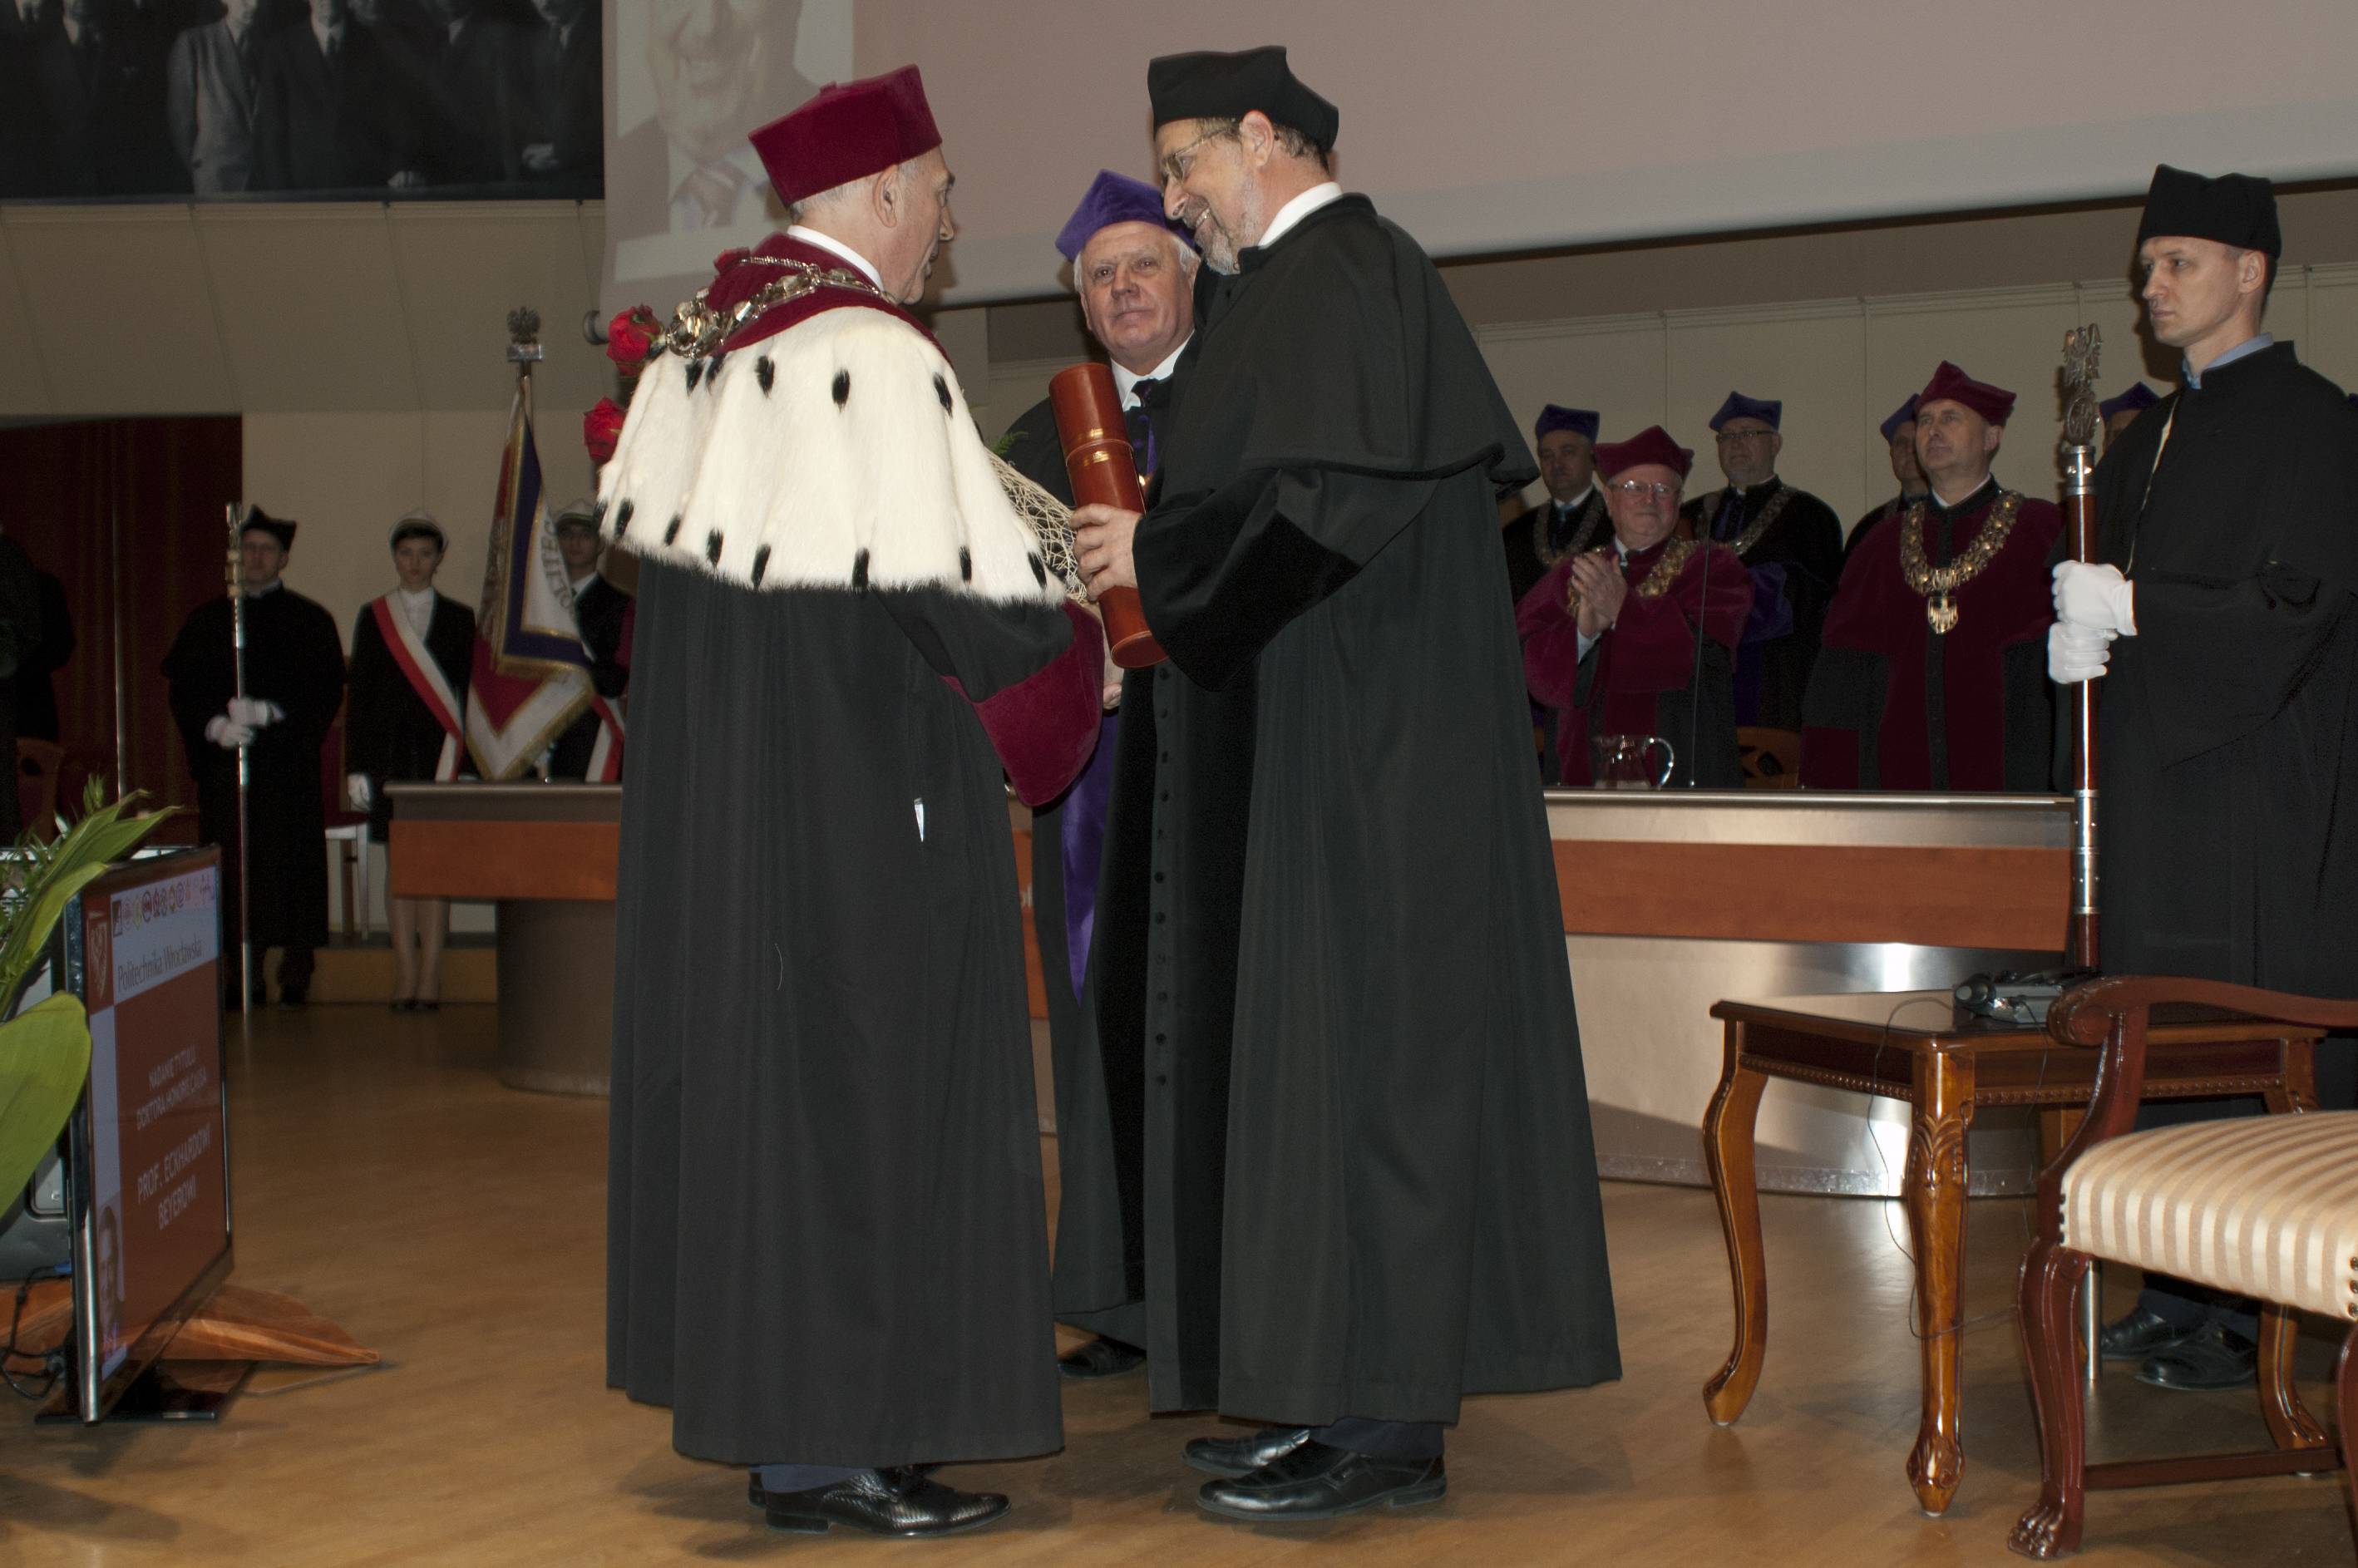 Prof. Dr.-Ing. habil. Tadeusz Wieckowski (lefts) awards Prof. Dr.-Ing. habil. Eckhard Beyer (right) the honorary doctorate degree